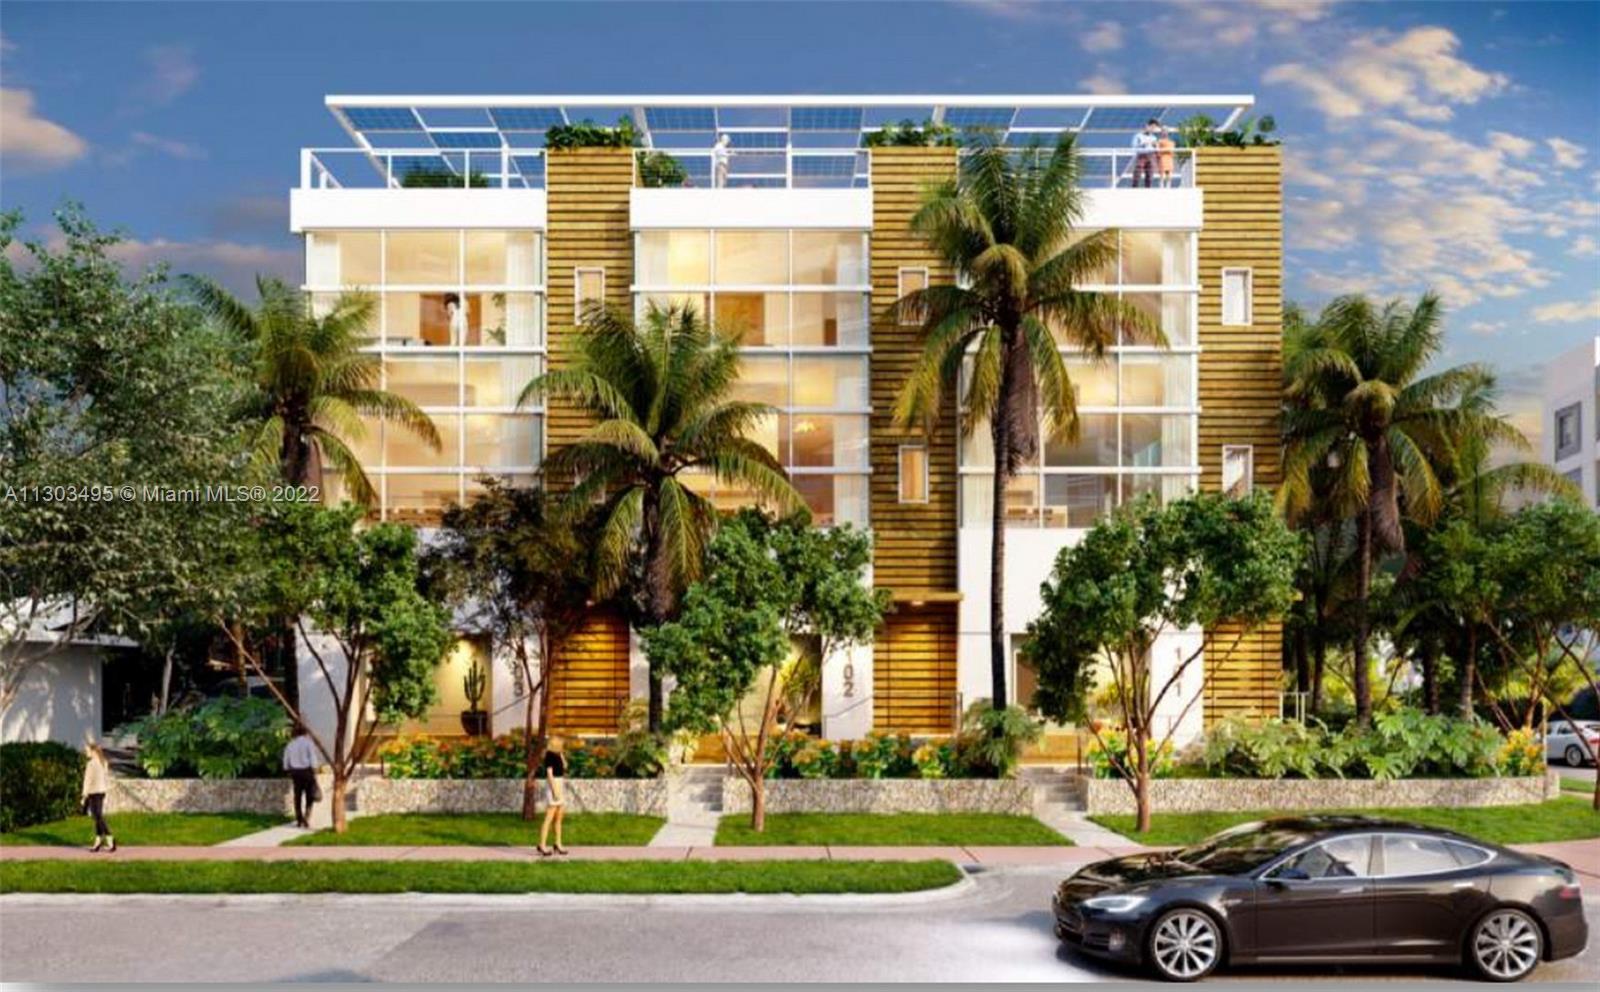 Location, Location, Location. Development Opportunity in the heart of South Beach.  This 6,000 square foot vacant property lot is in one of the most desirable areas of Miami Beach.  The Miami Design Review Board has approved a 7,440-square-foot multifamily/luxury townhouse. The complex consists of 3 units with 2,490-square-feet for each unit. Each townhouse contains 3-bedroom 3.5 bath with a 2-parking space garage. For the complex, a total of 6 garage spaces at ground level. The 50-foot-tall residence will have 3 rooftops solar arrays: 1 for each townhouse unit.  Other Environment Friendly project features include resilient landscaping, a rainwater retention system for irrigation, insulation and energy efficiency, nontoxic materials throughout, and automated ventilations.